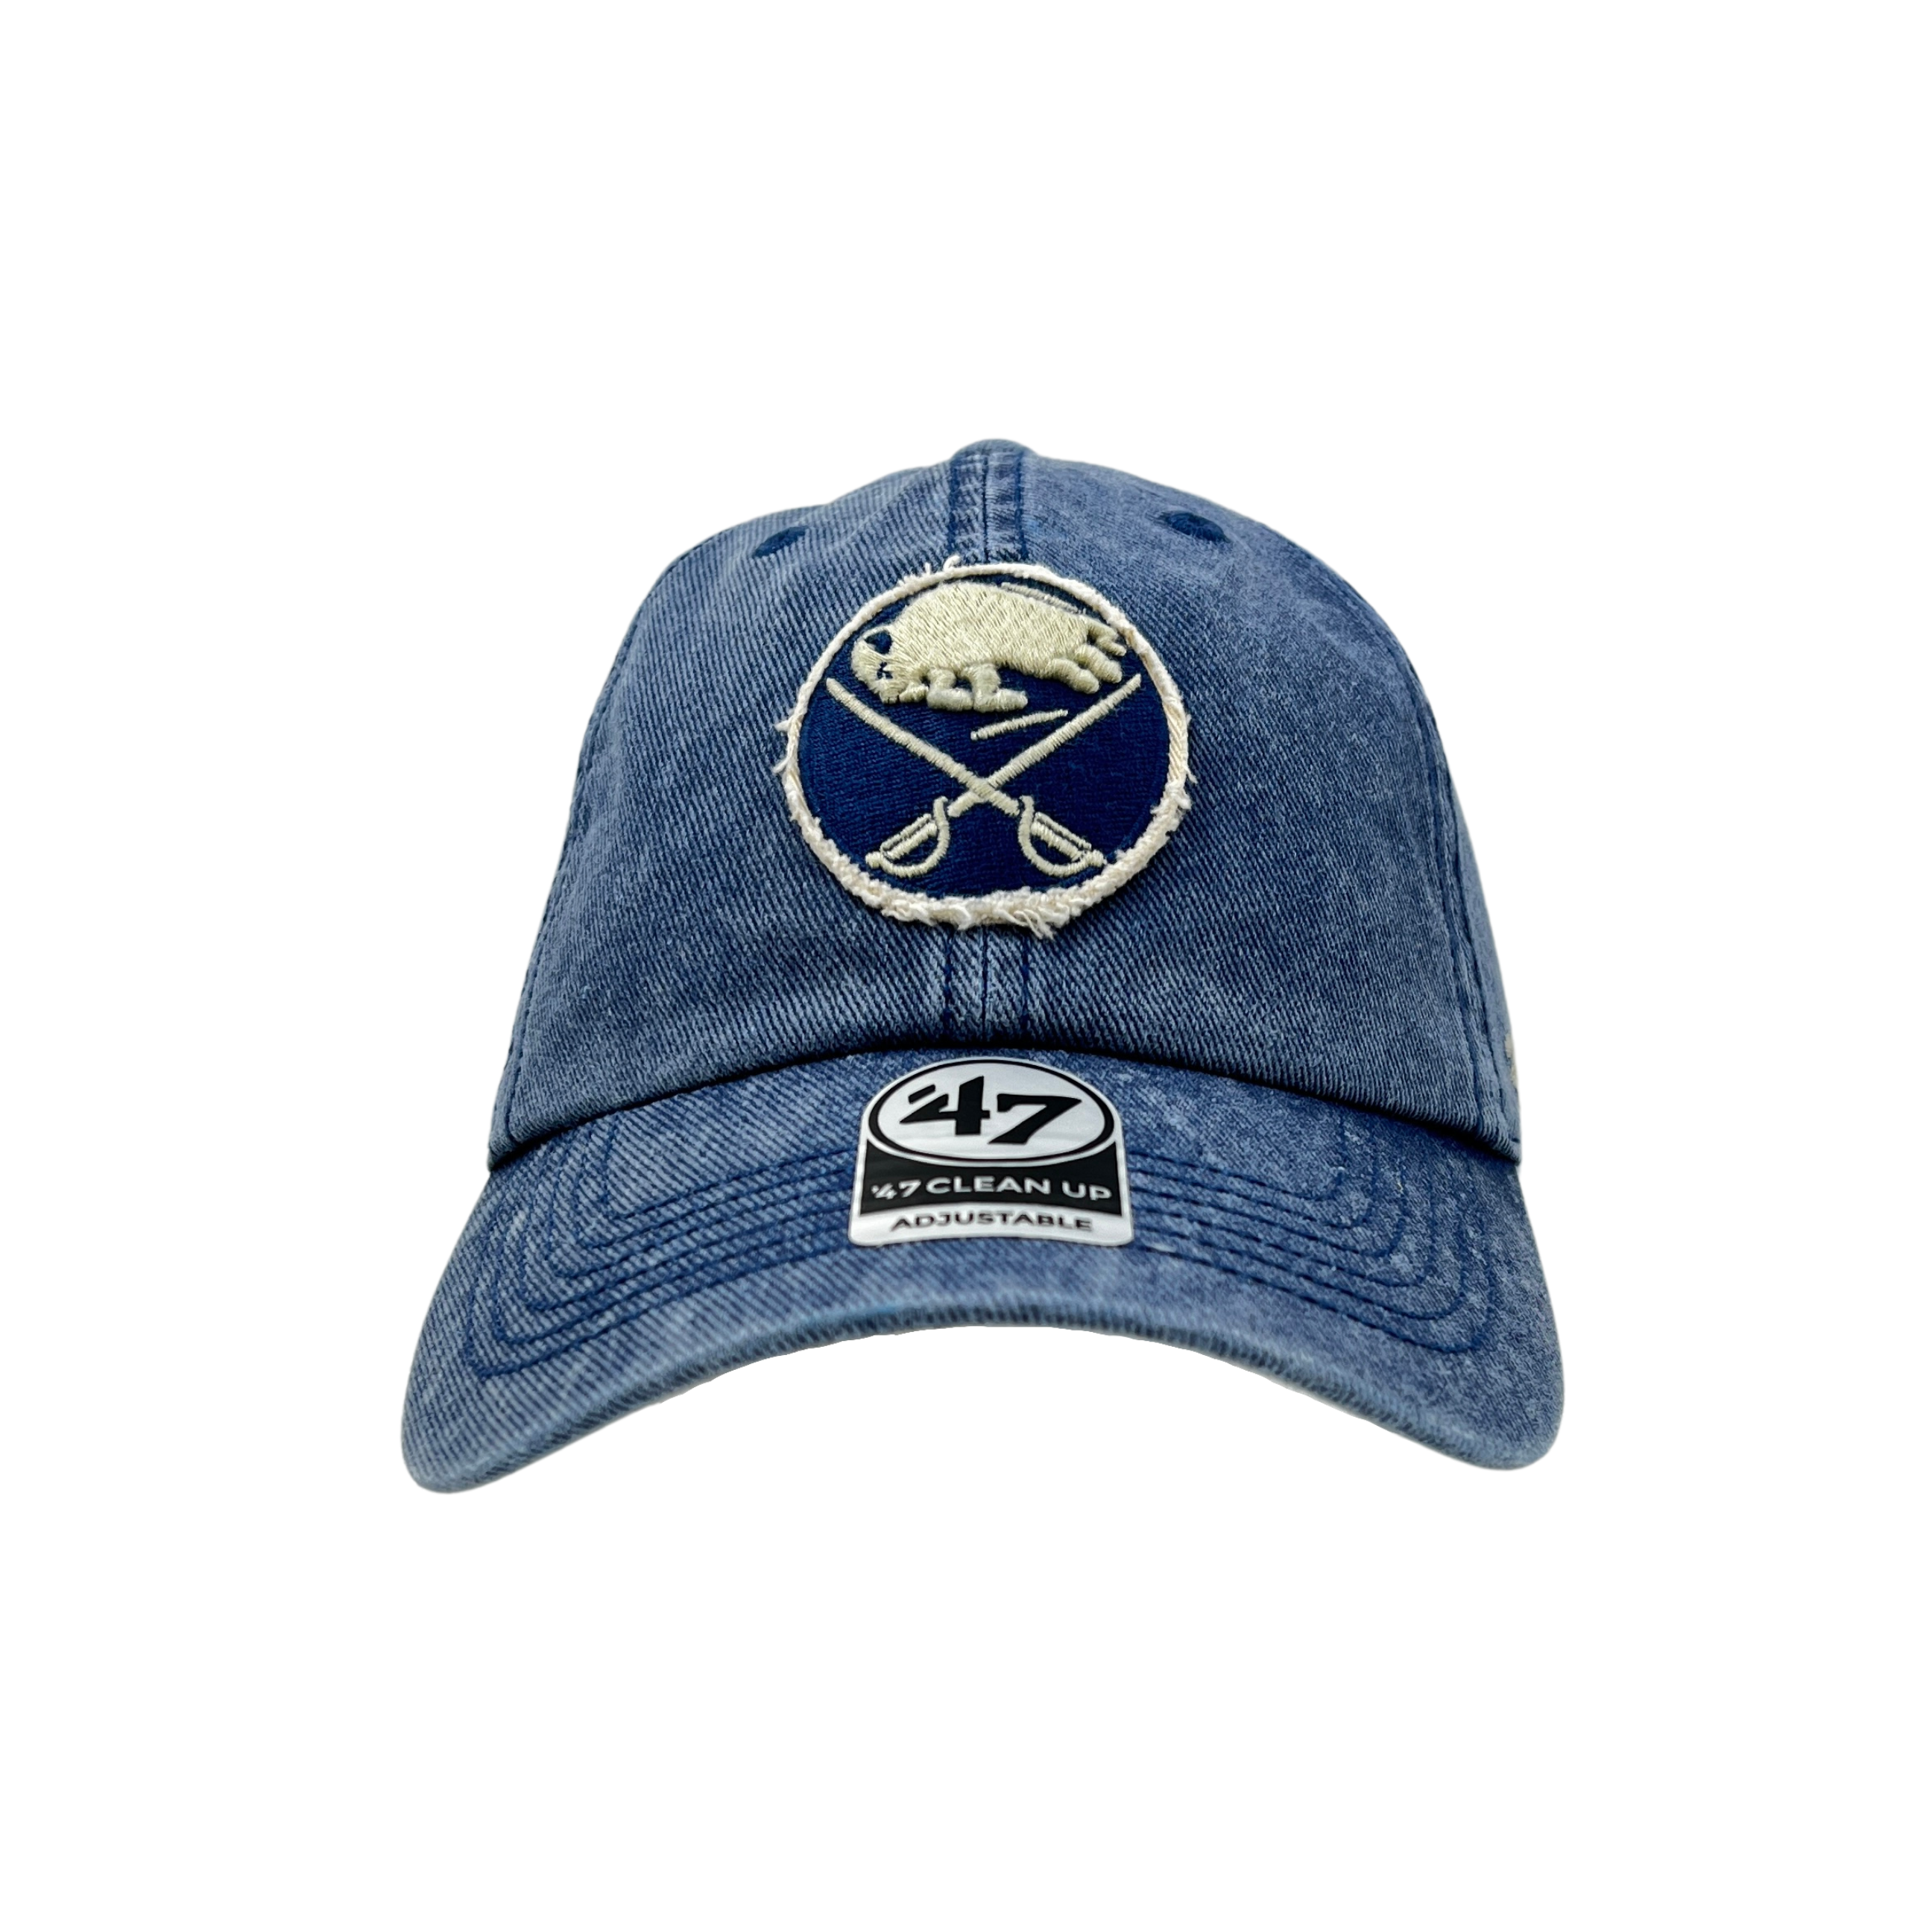 The BFLO Store - Have your kids cheer on the Buffalo Sabres while